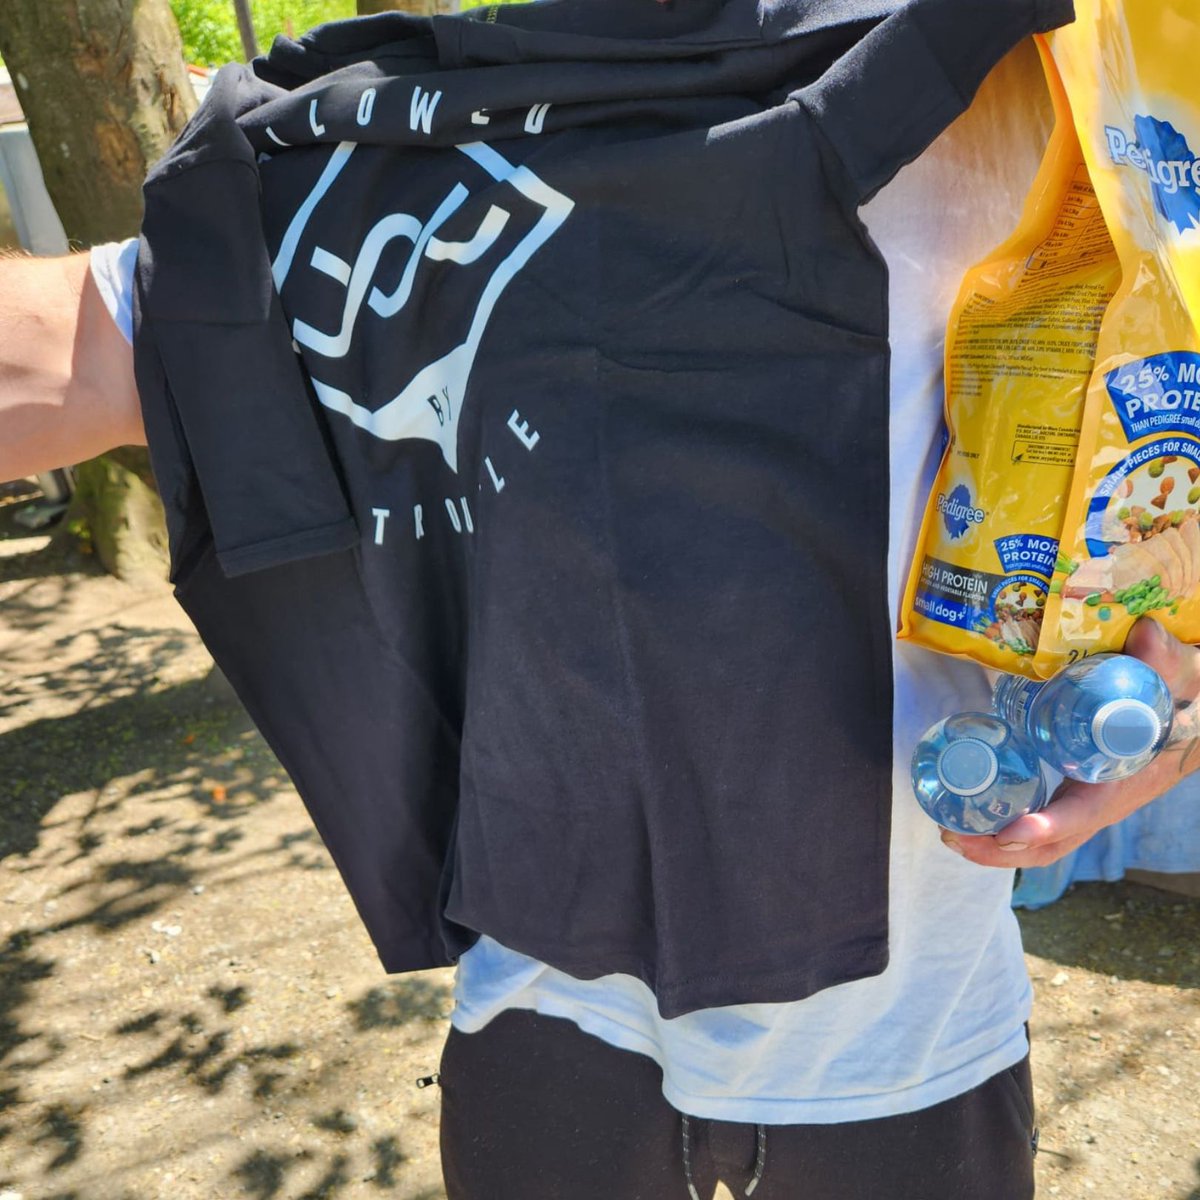 GNFK volunteers handed out t-shirts to community members living in encampments - contact Raman (raman@gnfk.org) to help!